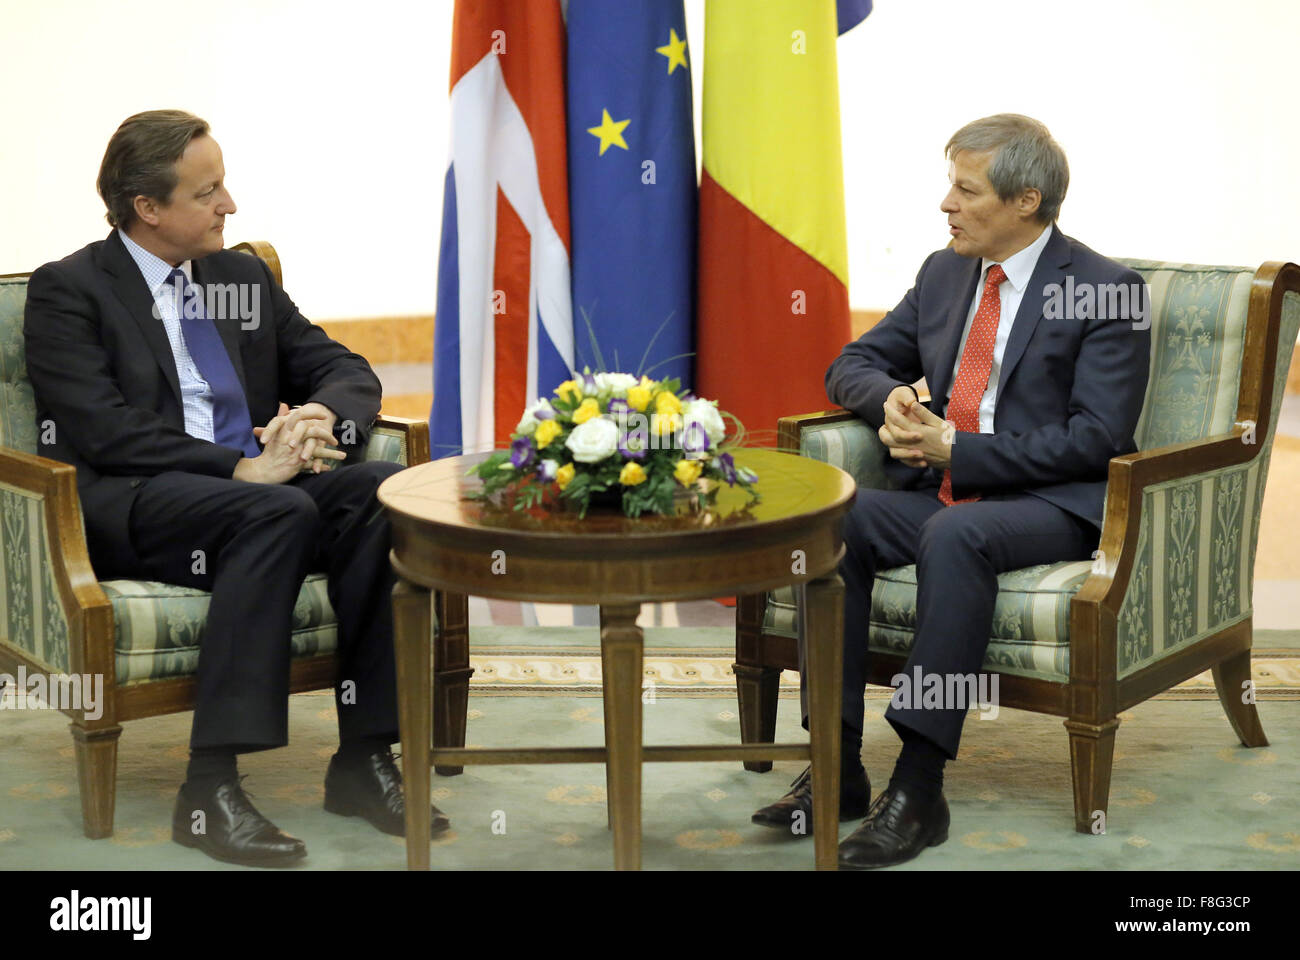 Bucharest, Romania. 9th Dec, 2015. Romanian Prime Minister Dacian Ciolos meets with his British counterpart David Cameron in Bucharest, capital of Romania, Dec. 9, 2015. Cameron arrived in Bucharest Wednesday afternoon for a short official visit. Credit:  Cristian Cristel/Xinhua/Alamy Live News Stock Photo